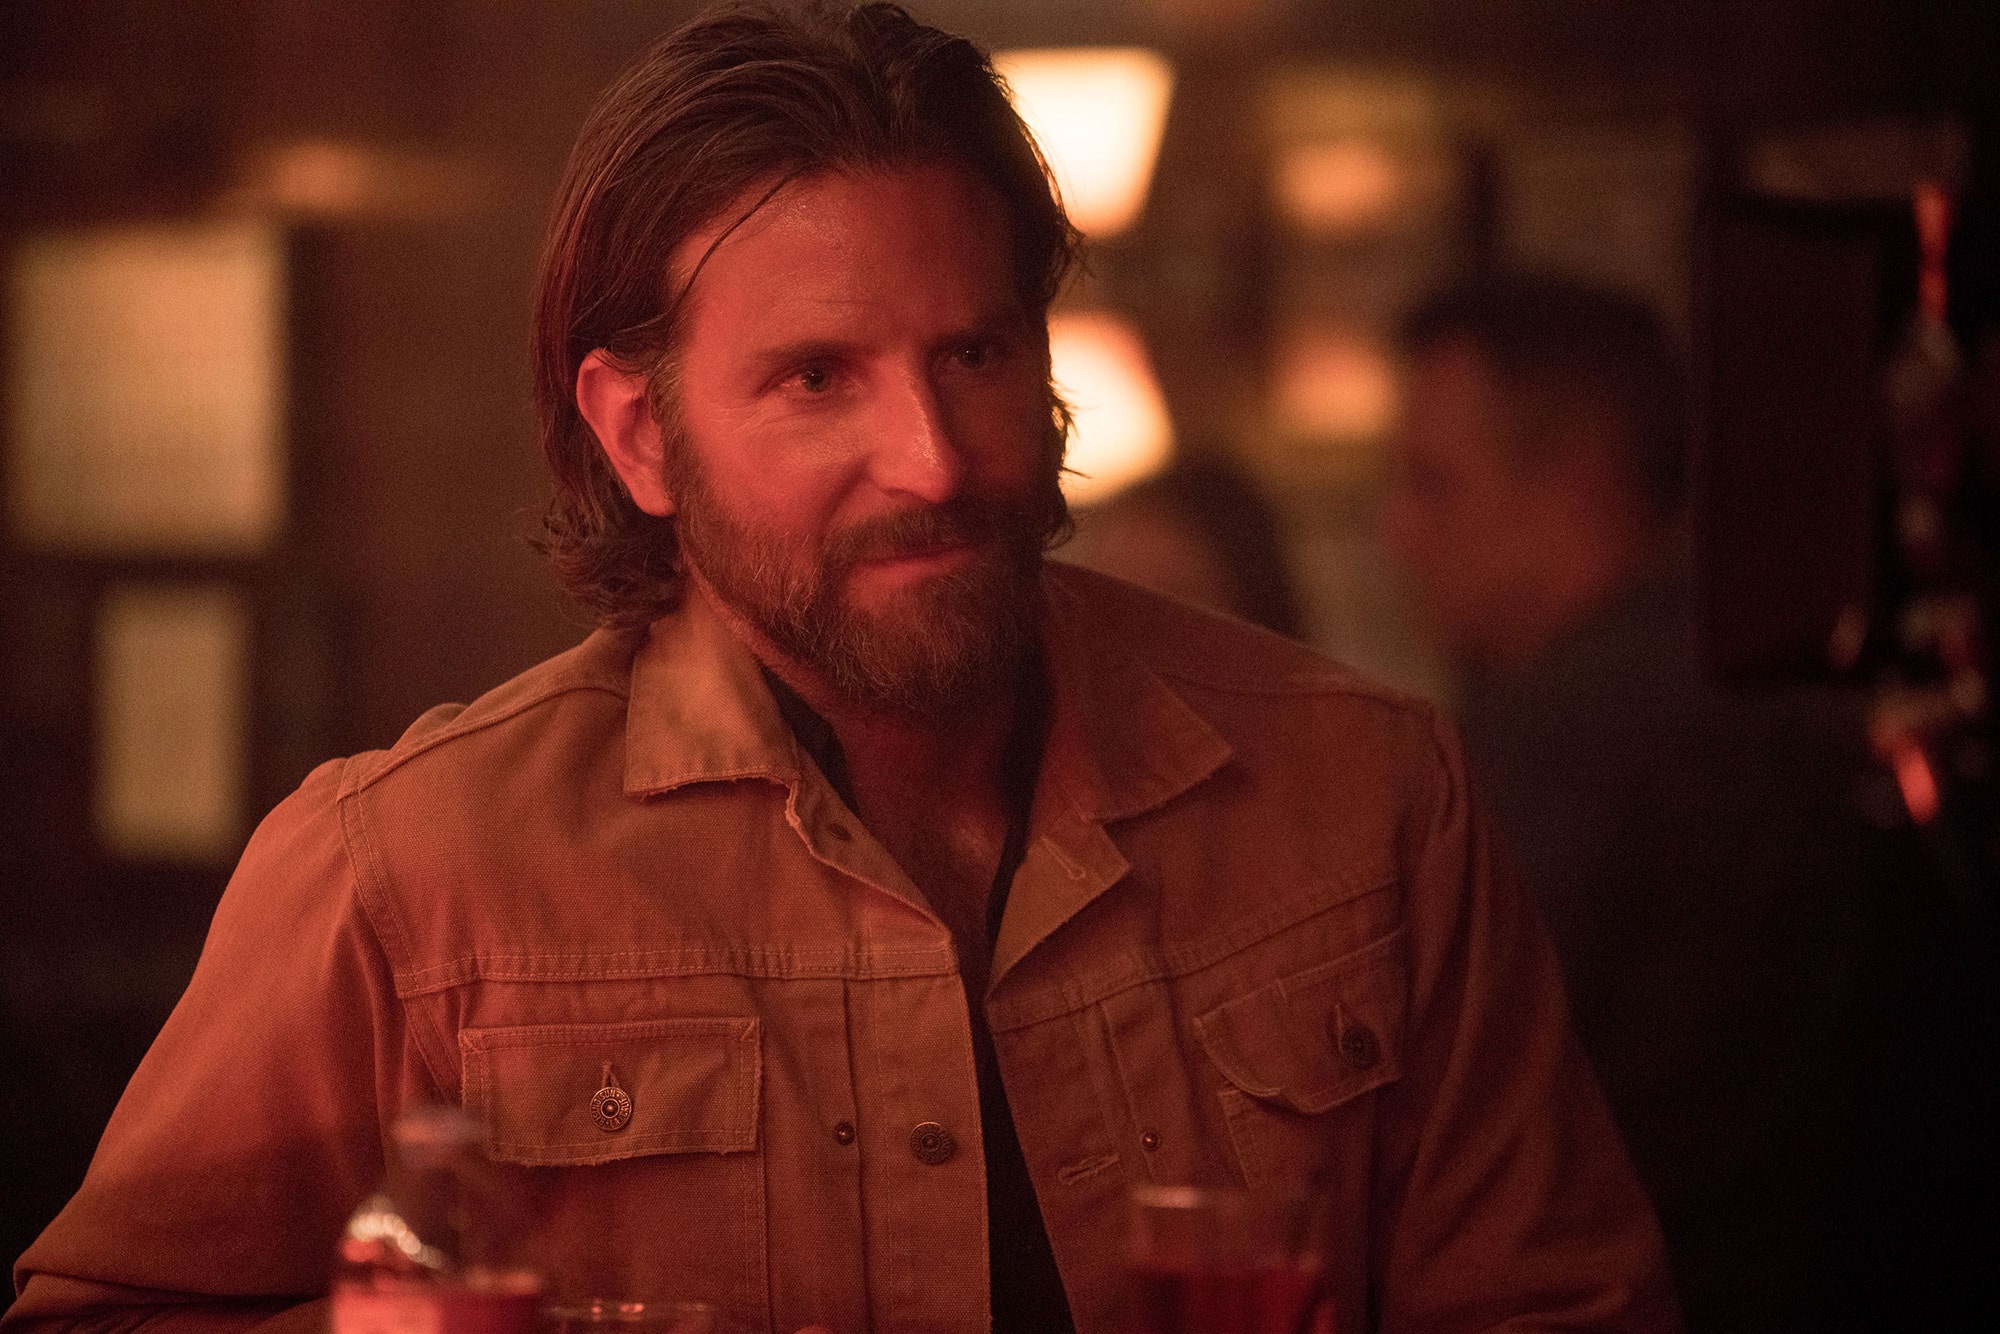 Bradley Cooper on Limitless, the Hangover, and Why He Doesn't Drink